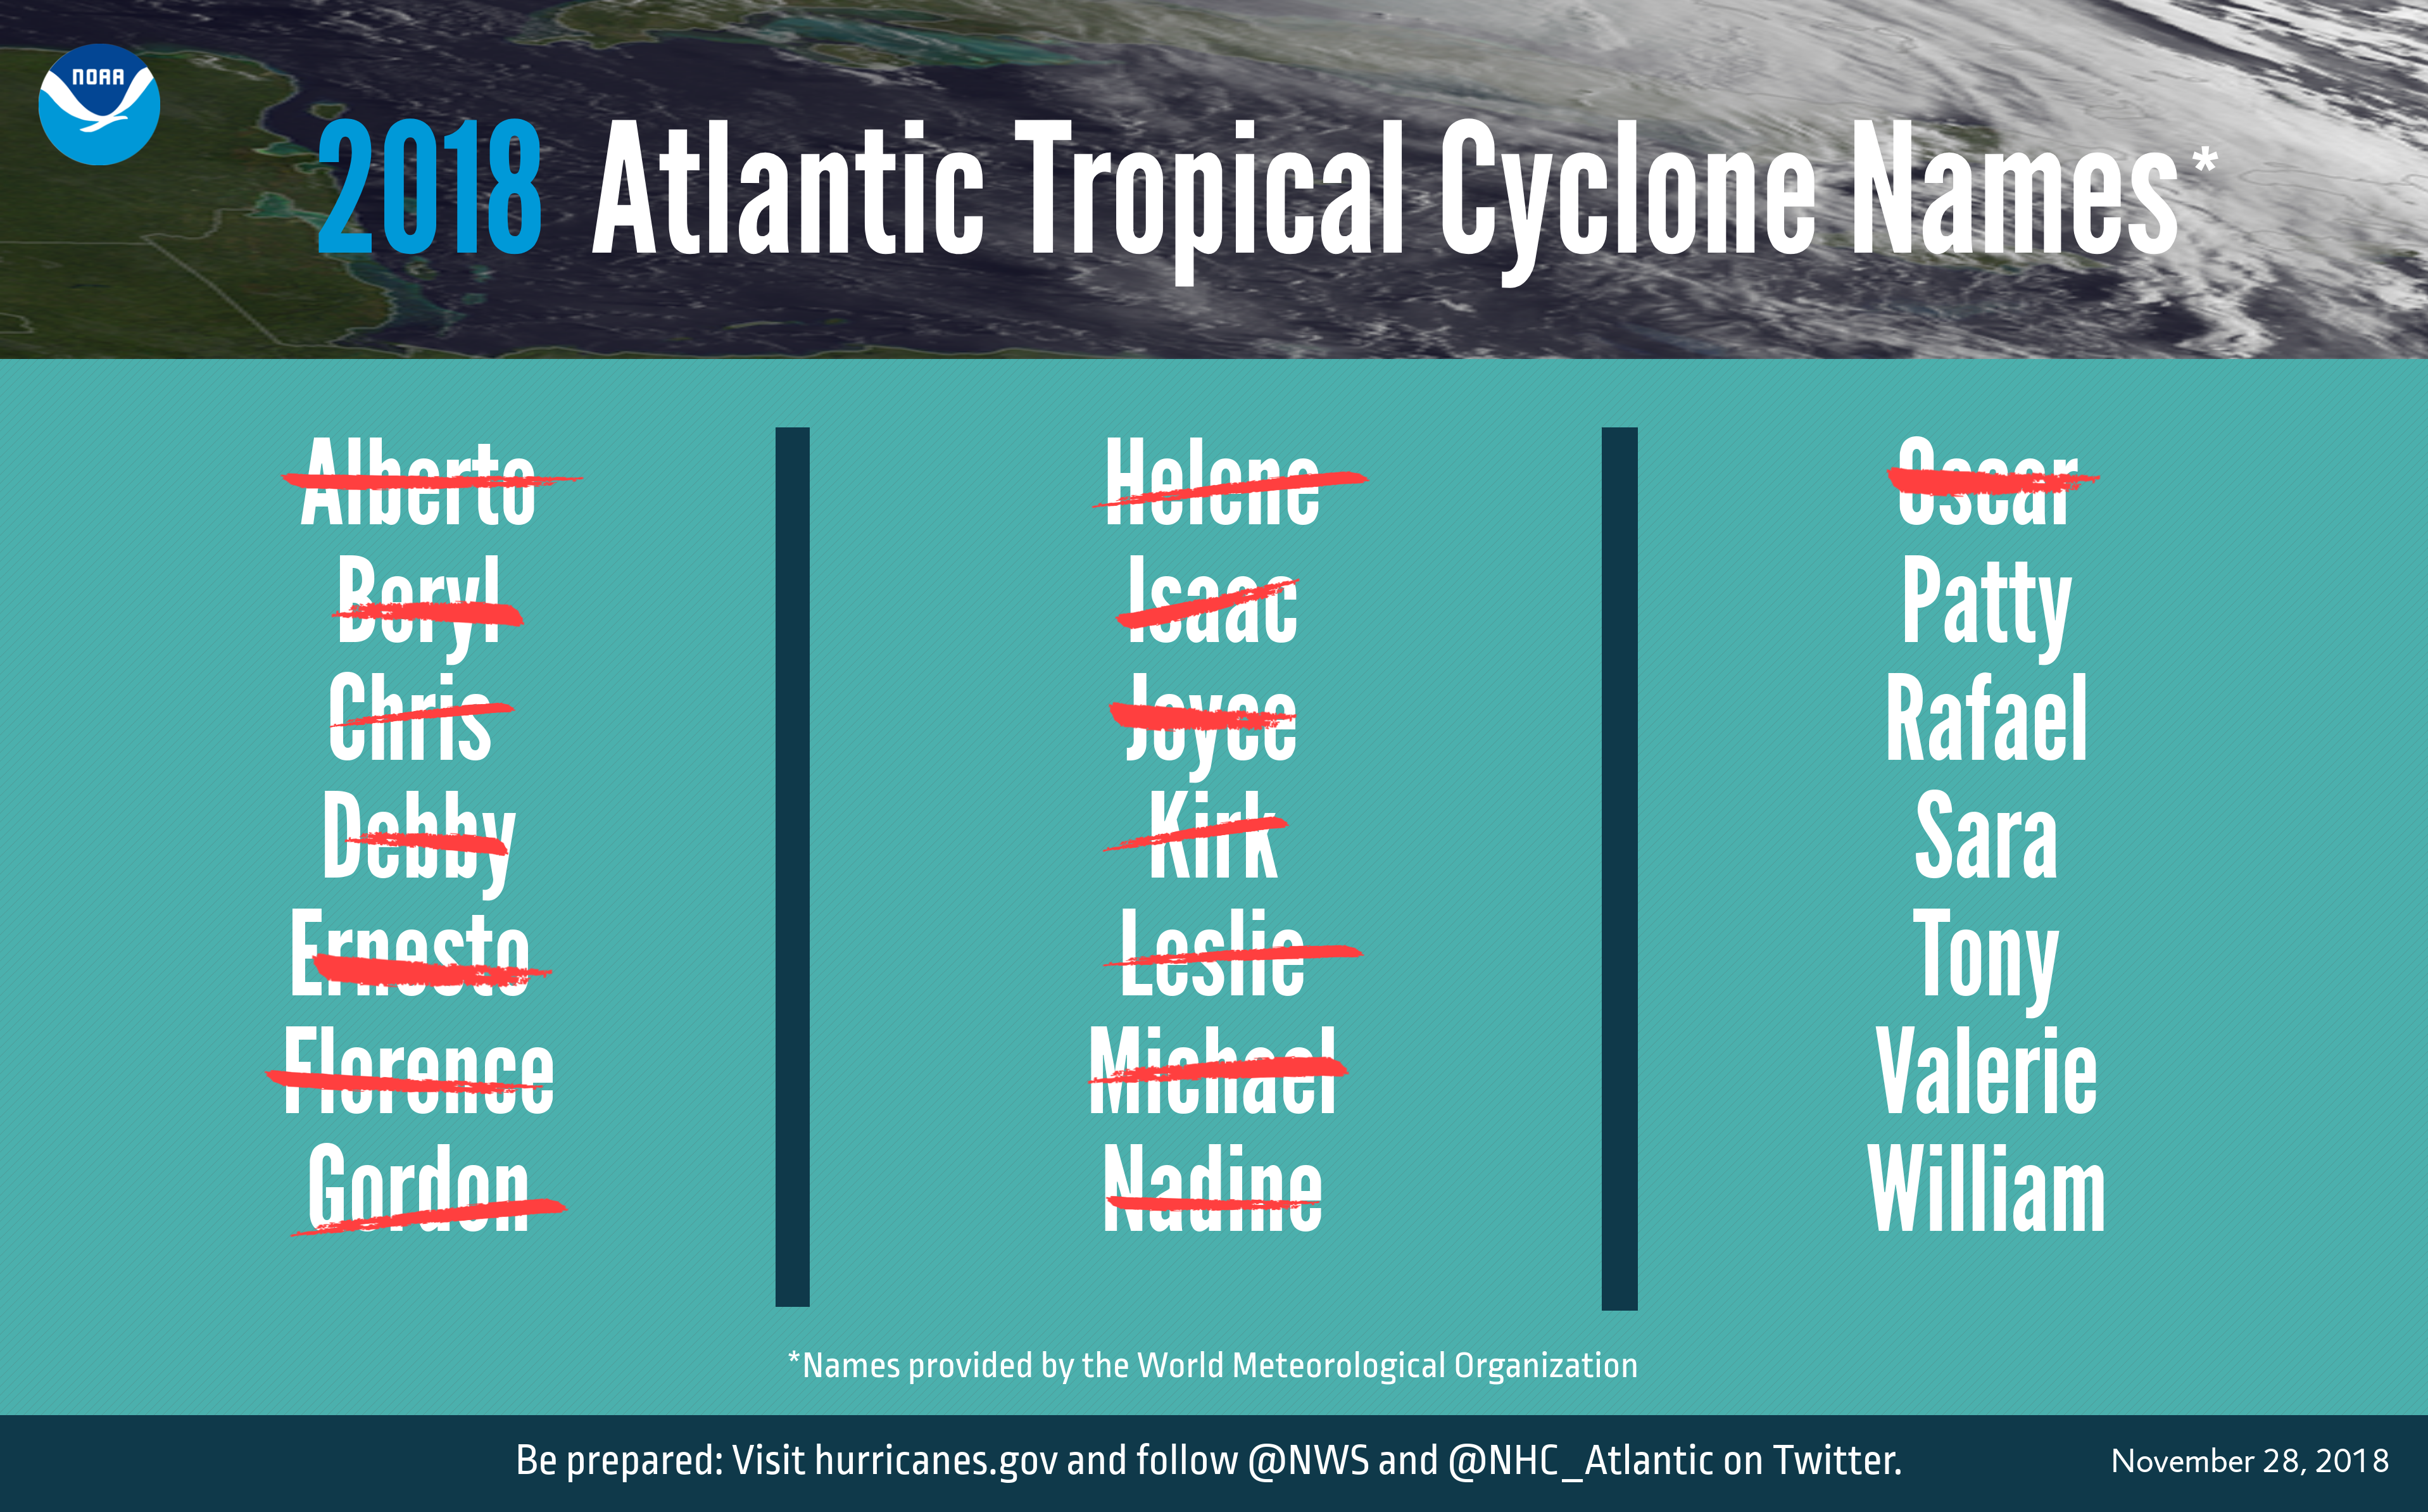 A graphic showing 2018 Atlantic tropical cyclone names selected by the World Meteorological Organization. This year, the U.S. saw 15 named storms.